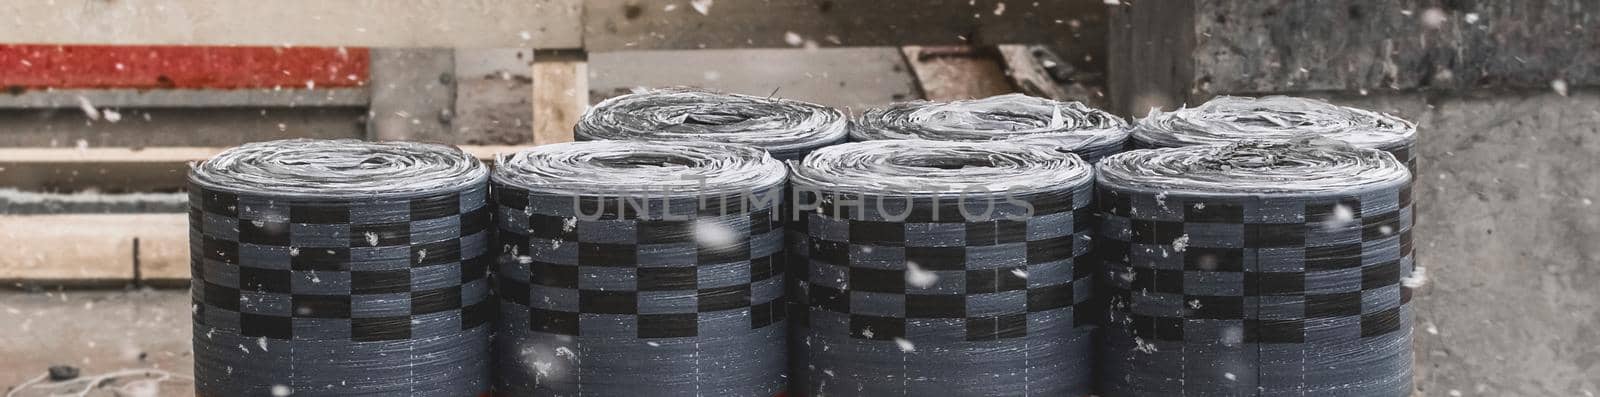 Pile of rolls of dark thermal insulation industrial materials storage outdoor on a construction site during a snowfall by AYDO8